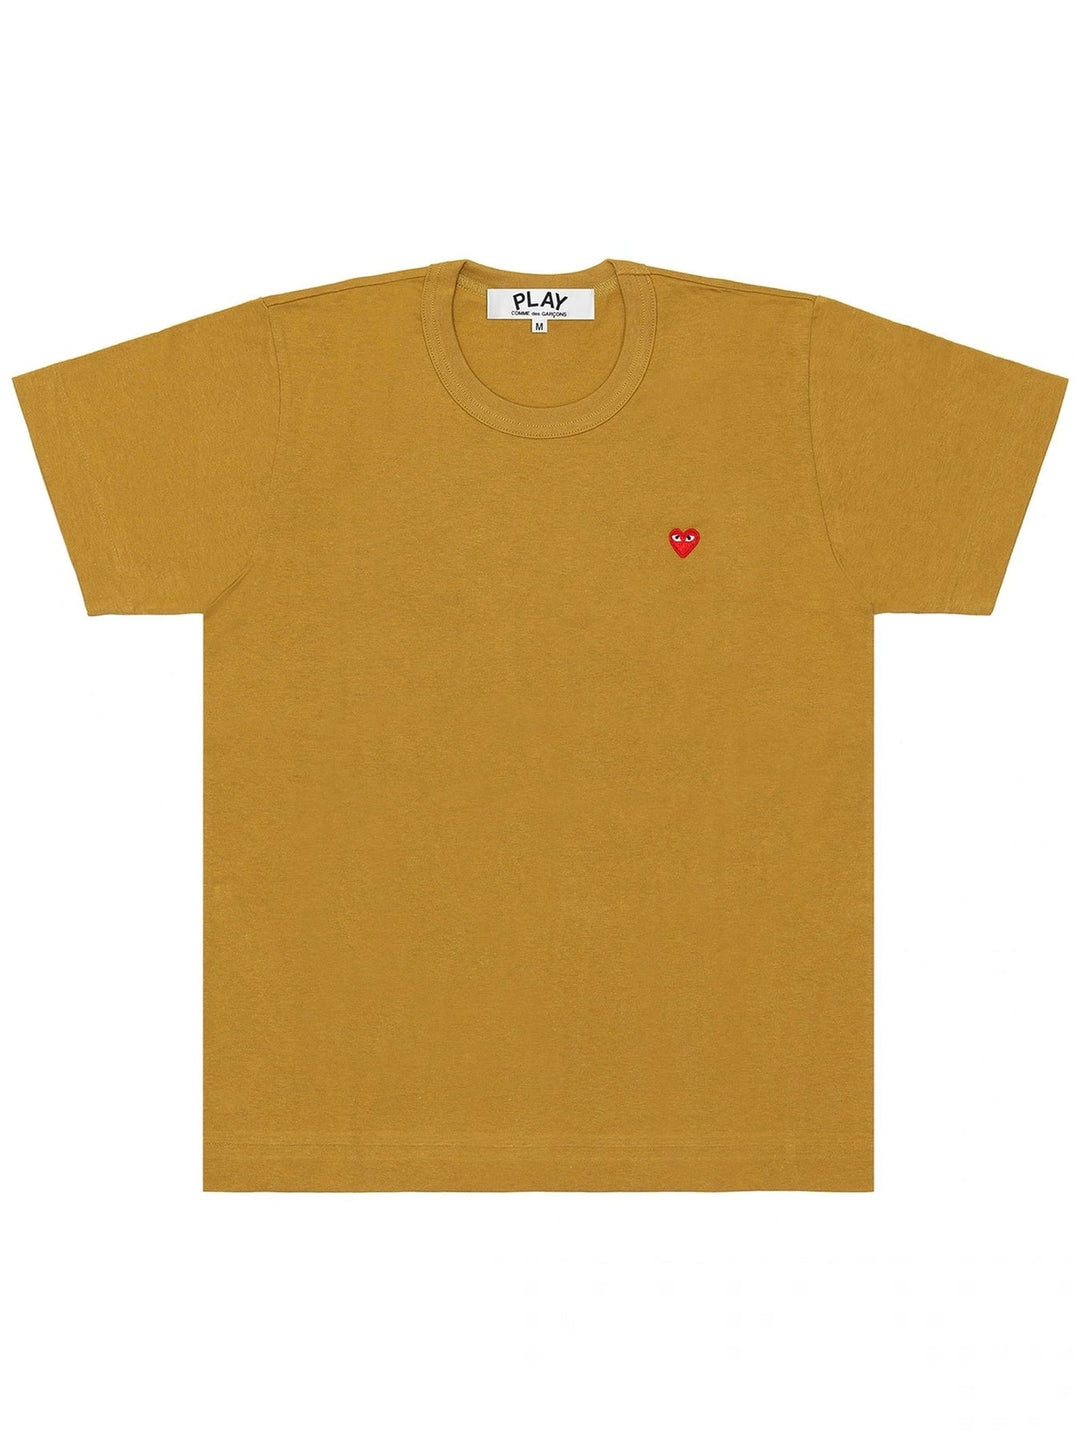 COMME DES GARCONS PLAY SMALL RED HEART T-SHIRT - Olive - AZ-T314-051-5